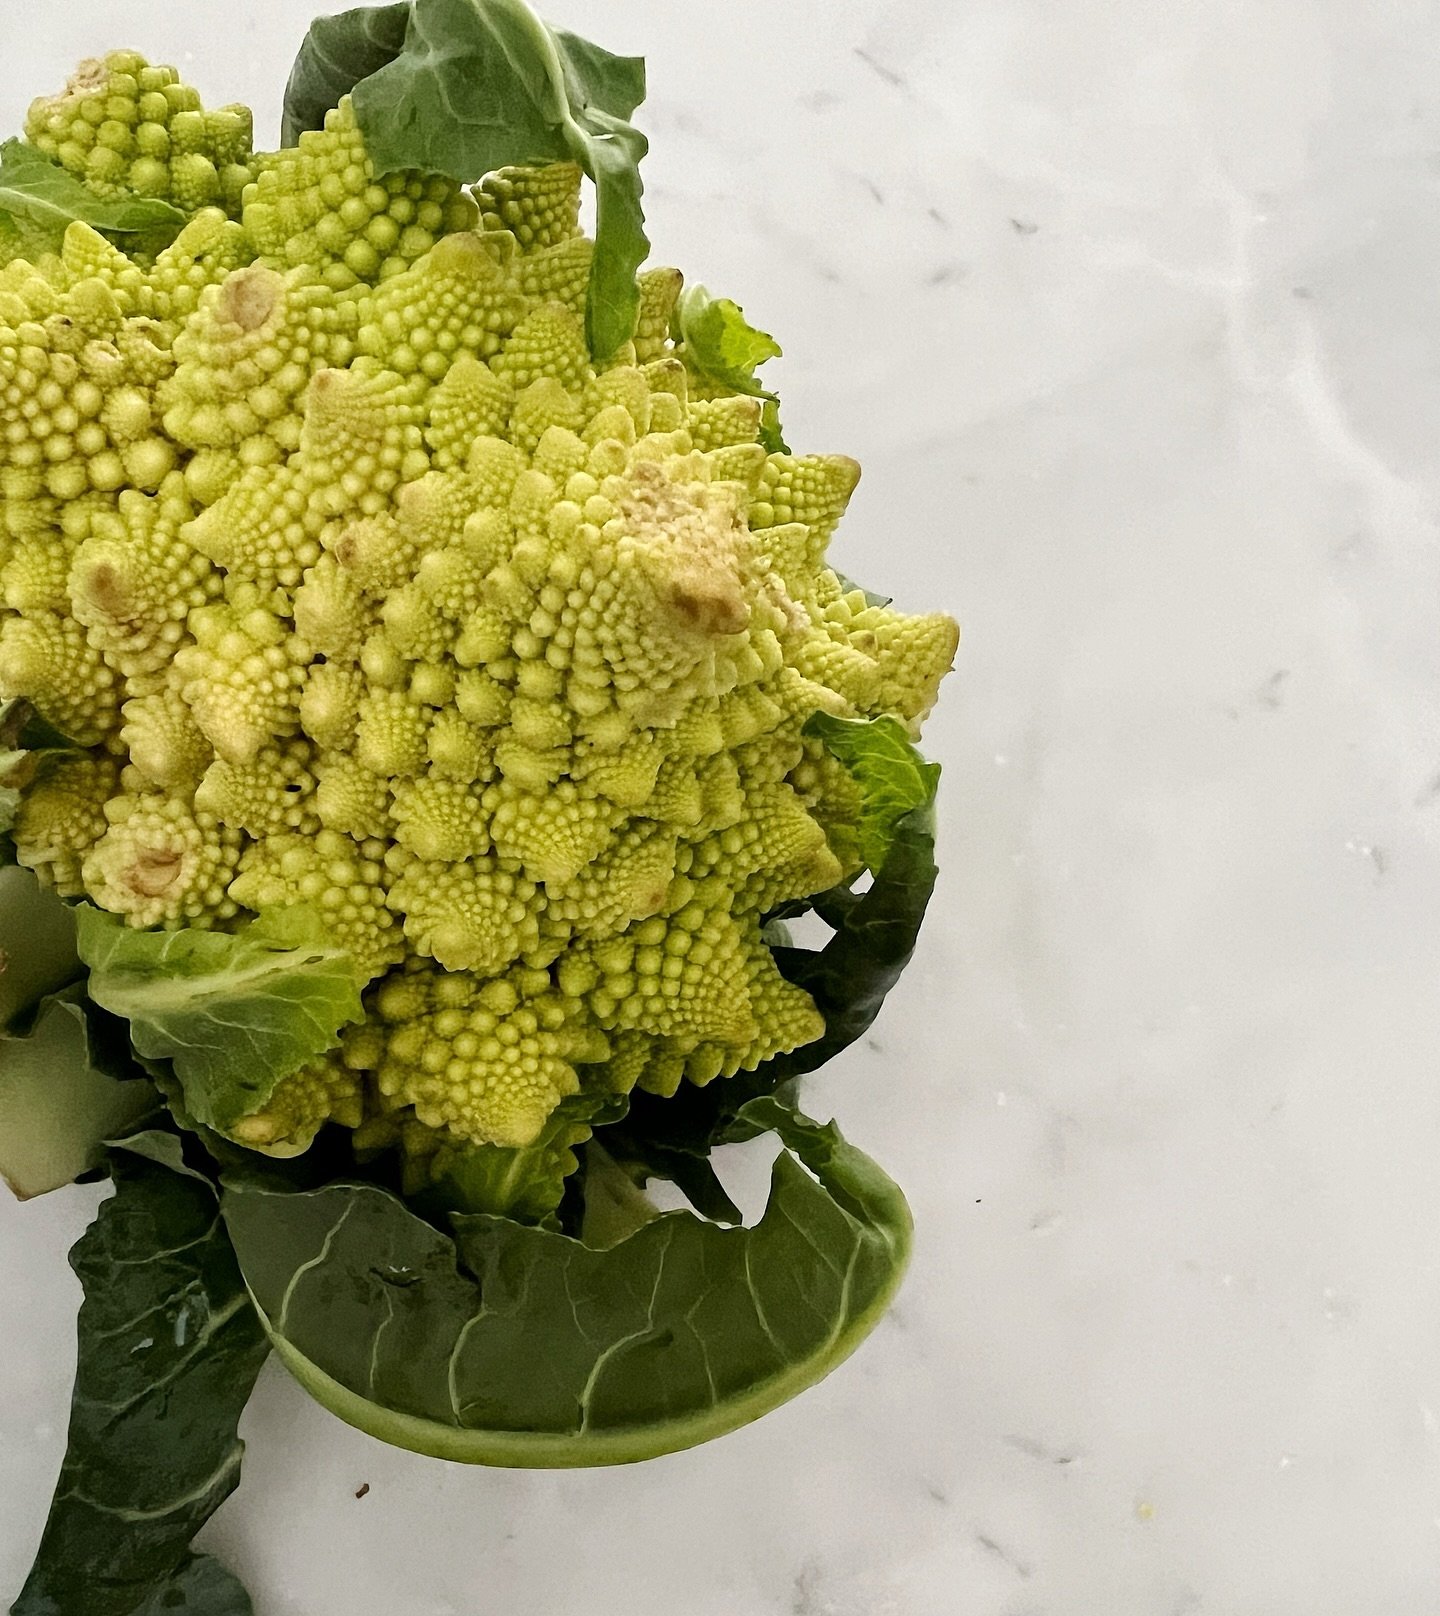 Romanesco 

This Italian vegetable always catches my eye each spring. A gorgeous specimen on its own. I&rsquo;ve actually never cooked one I just buy them to photograph and enjoy in a bowl out on the island. Maybe this is the moment to learn how to m